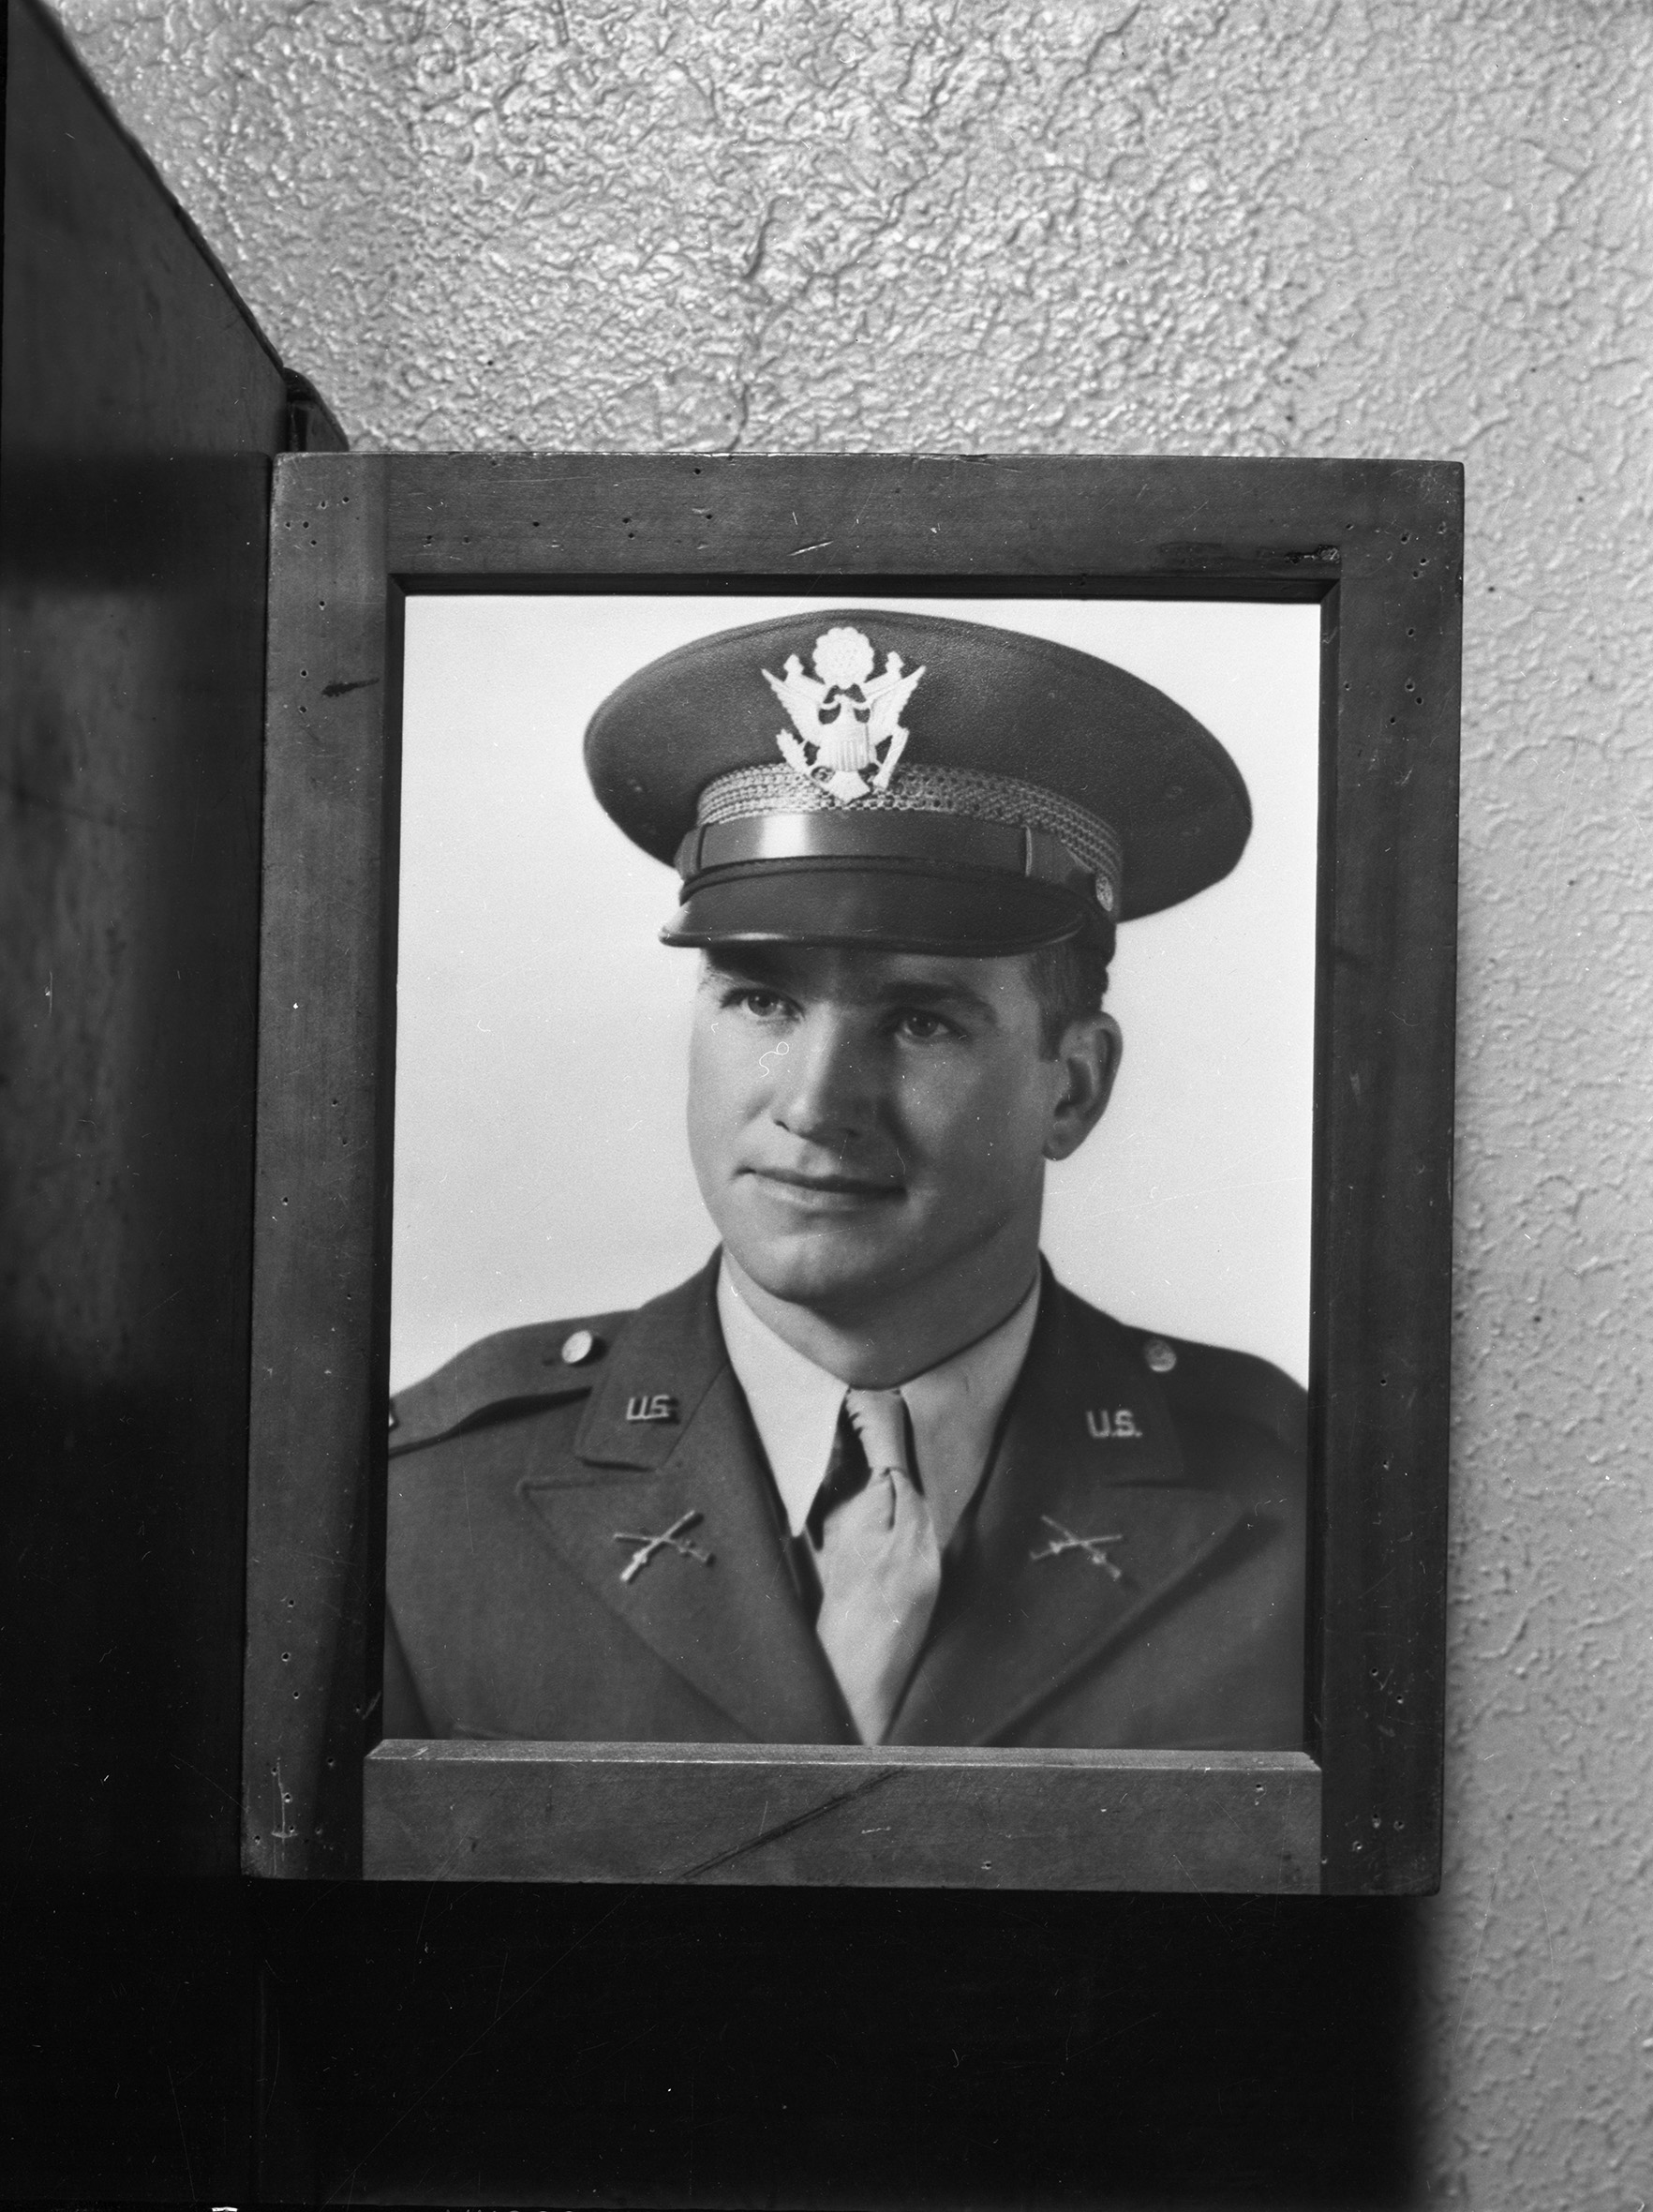 A copy of Captain Slaughter's official portrait photograph in a wooden frame. He is shown dressed in military uniform.